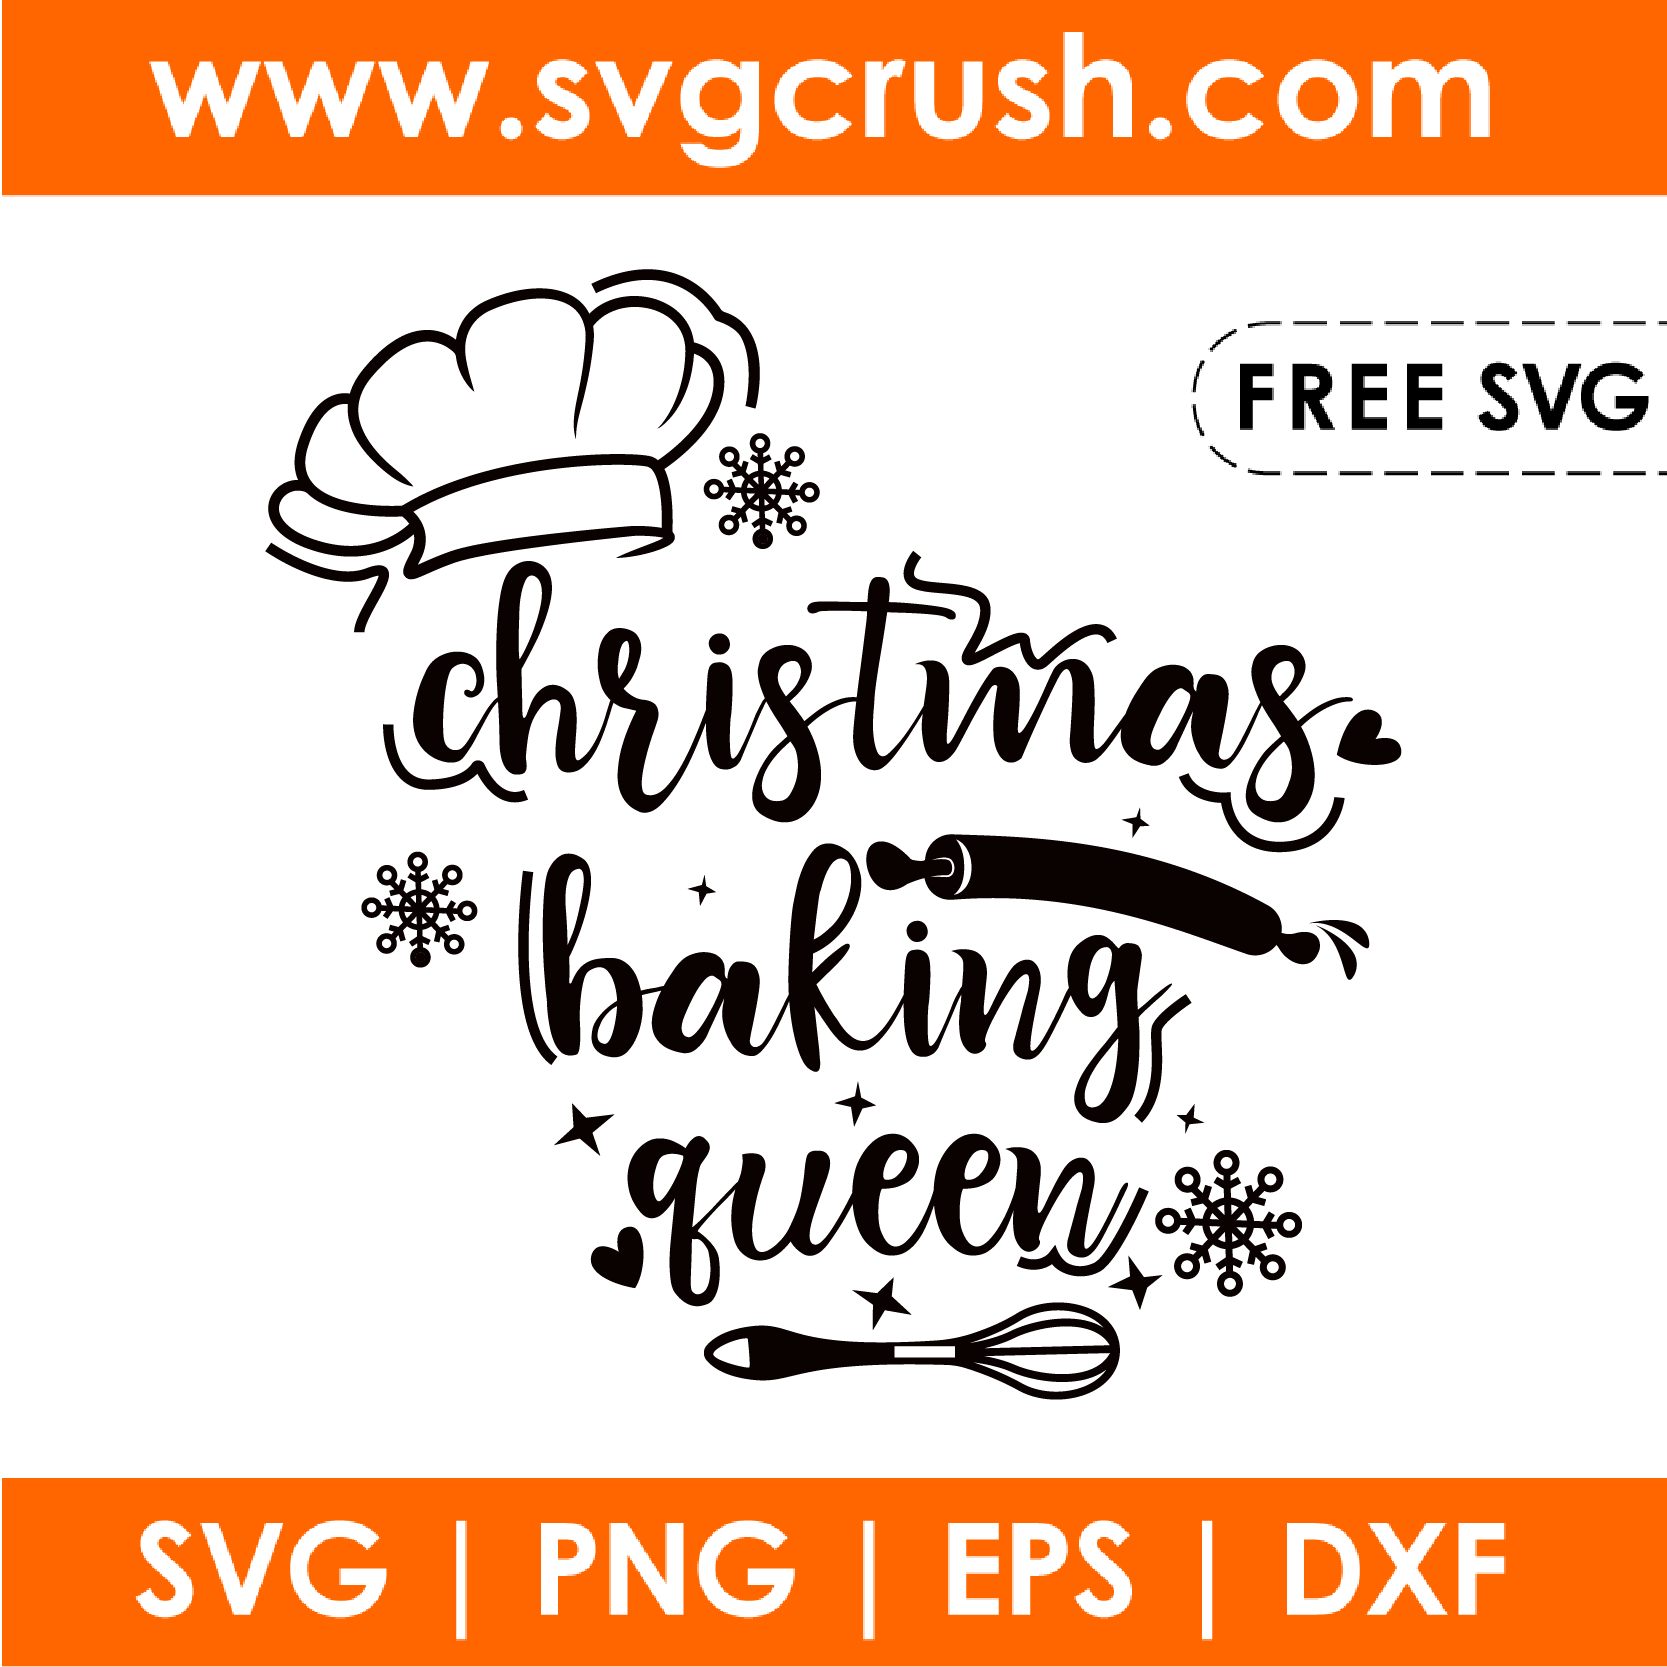 free christmas-baking-queen-001 svg